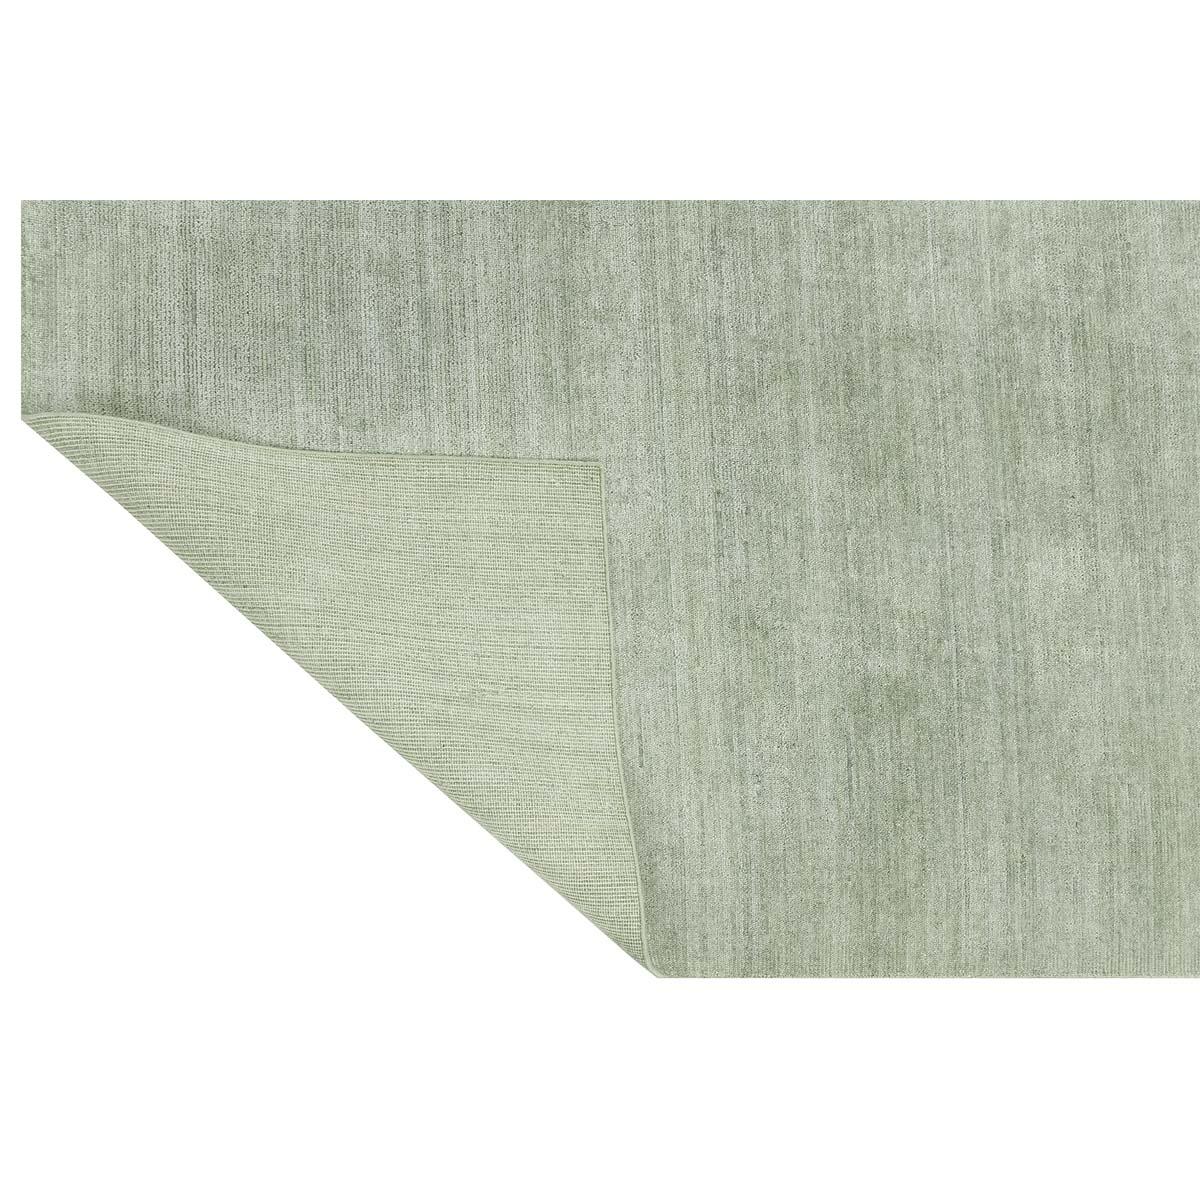 Hand-Woven Luxurious Hand Loomed Light Green Area Rug For Sale